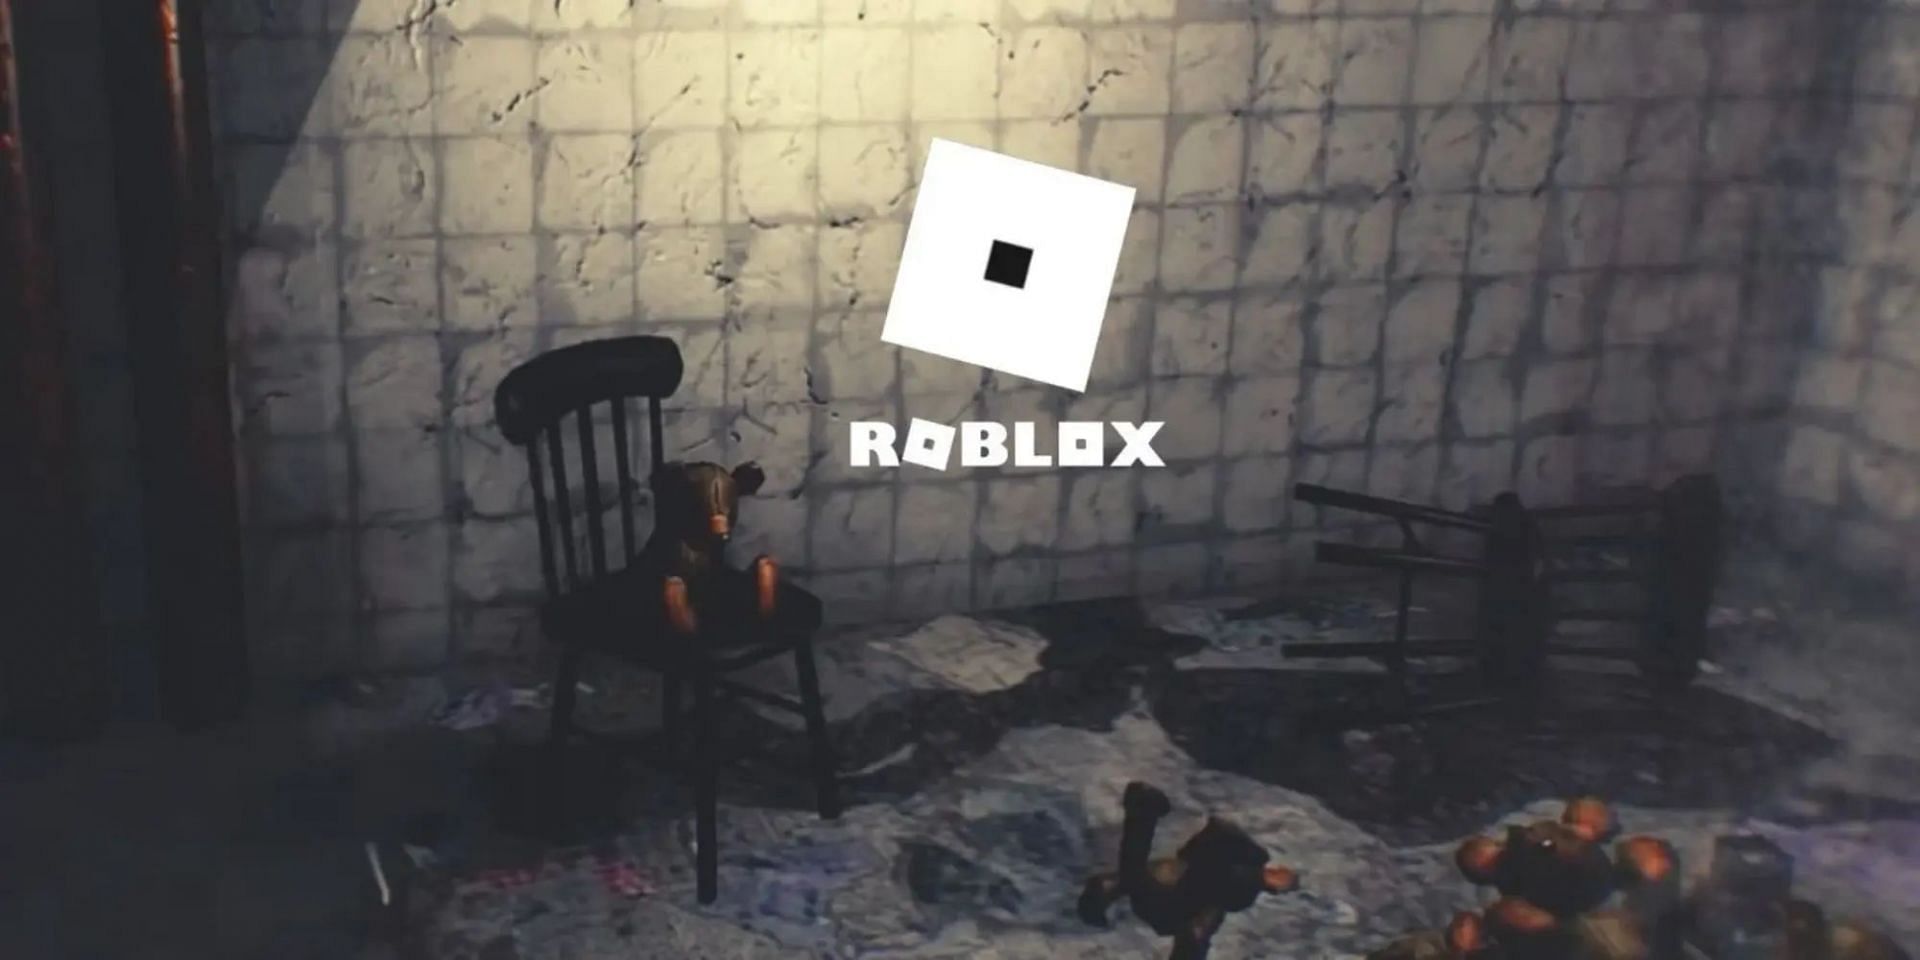  Roblox just got scary (Image via Roblox)